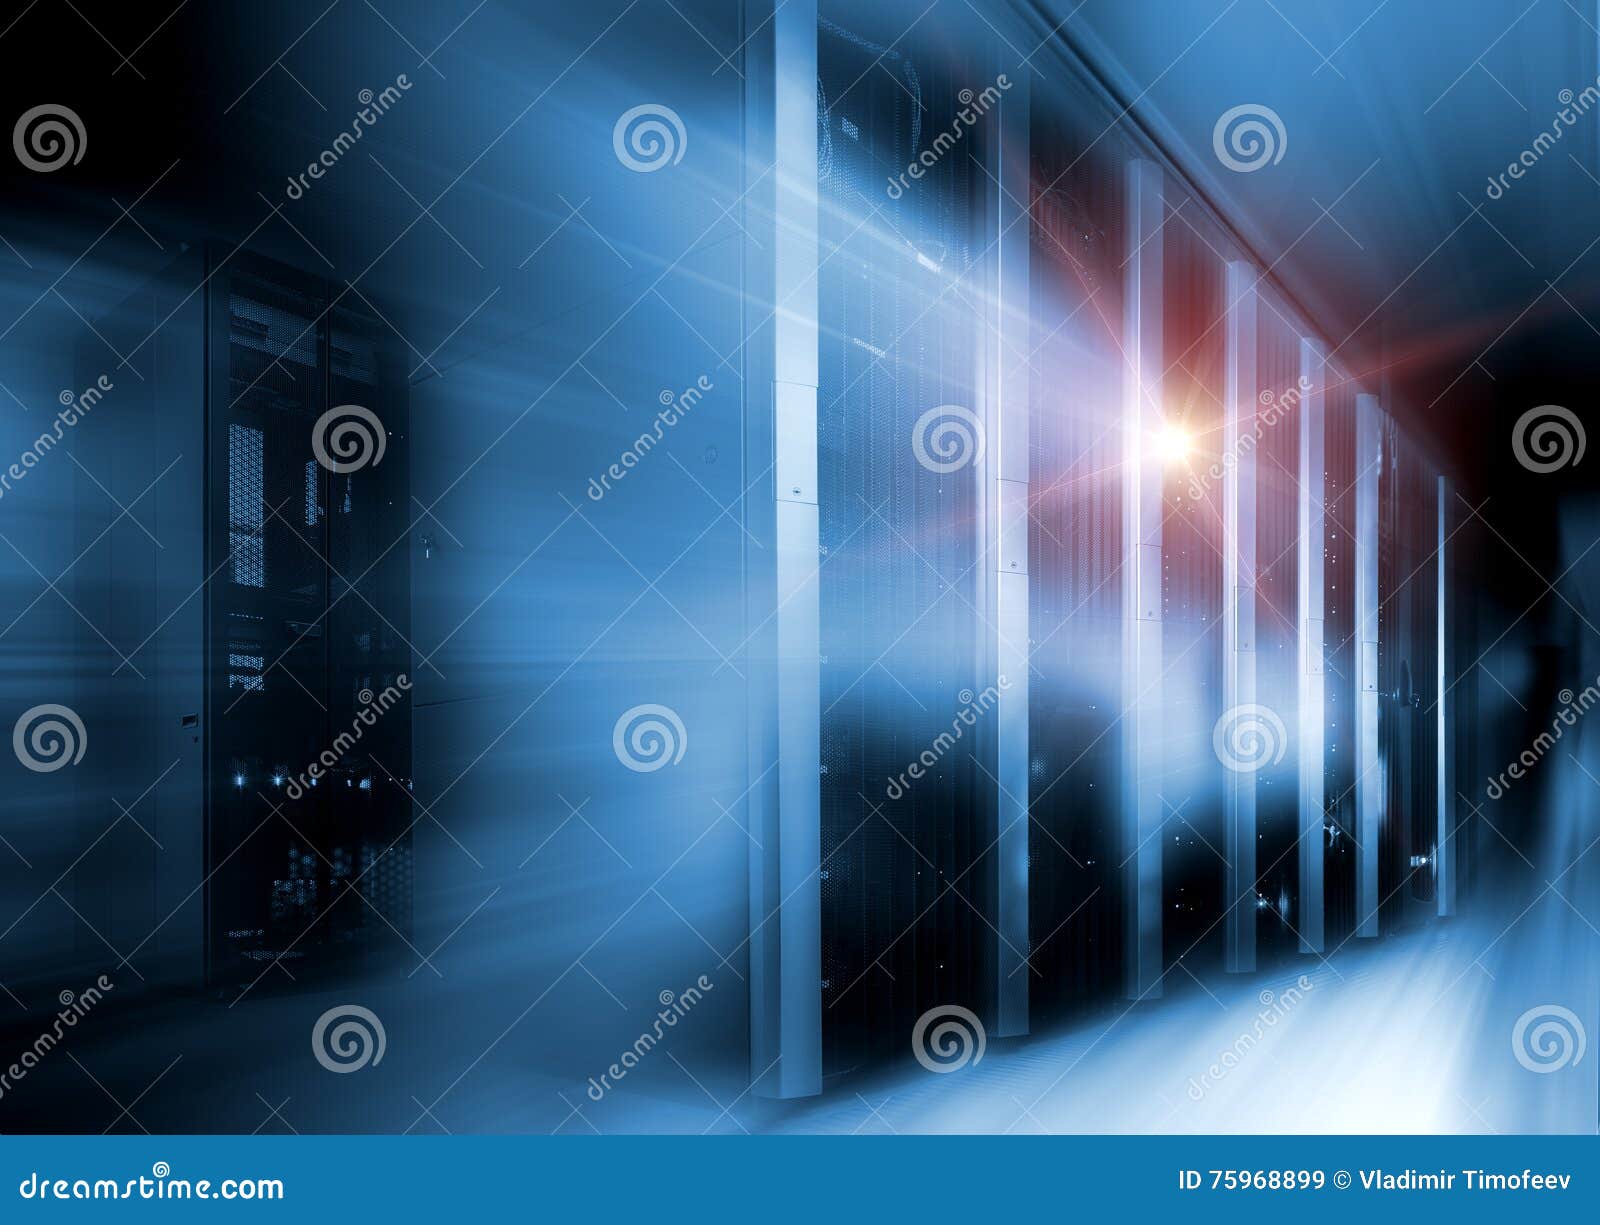 Server Room In Dark With Blue Colored Lights Motion Stock